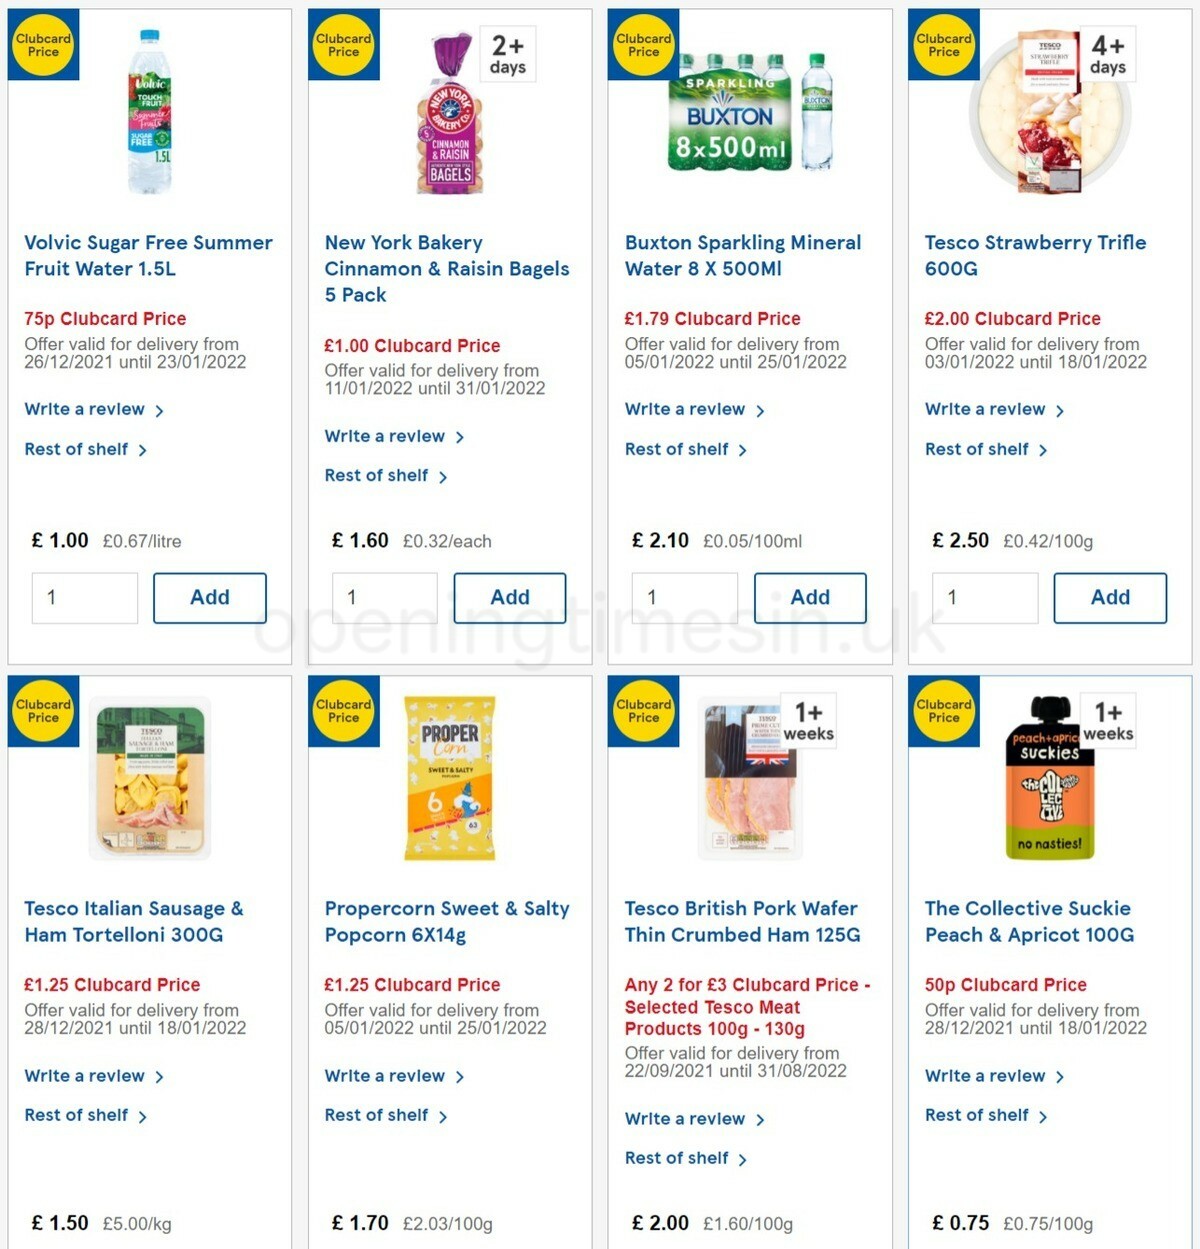 TESCO Offers from 12 January